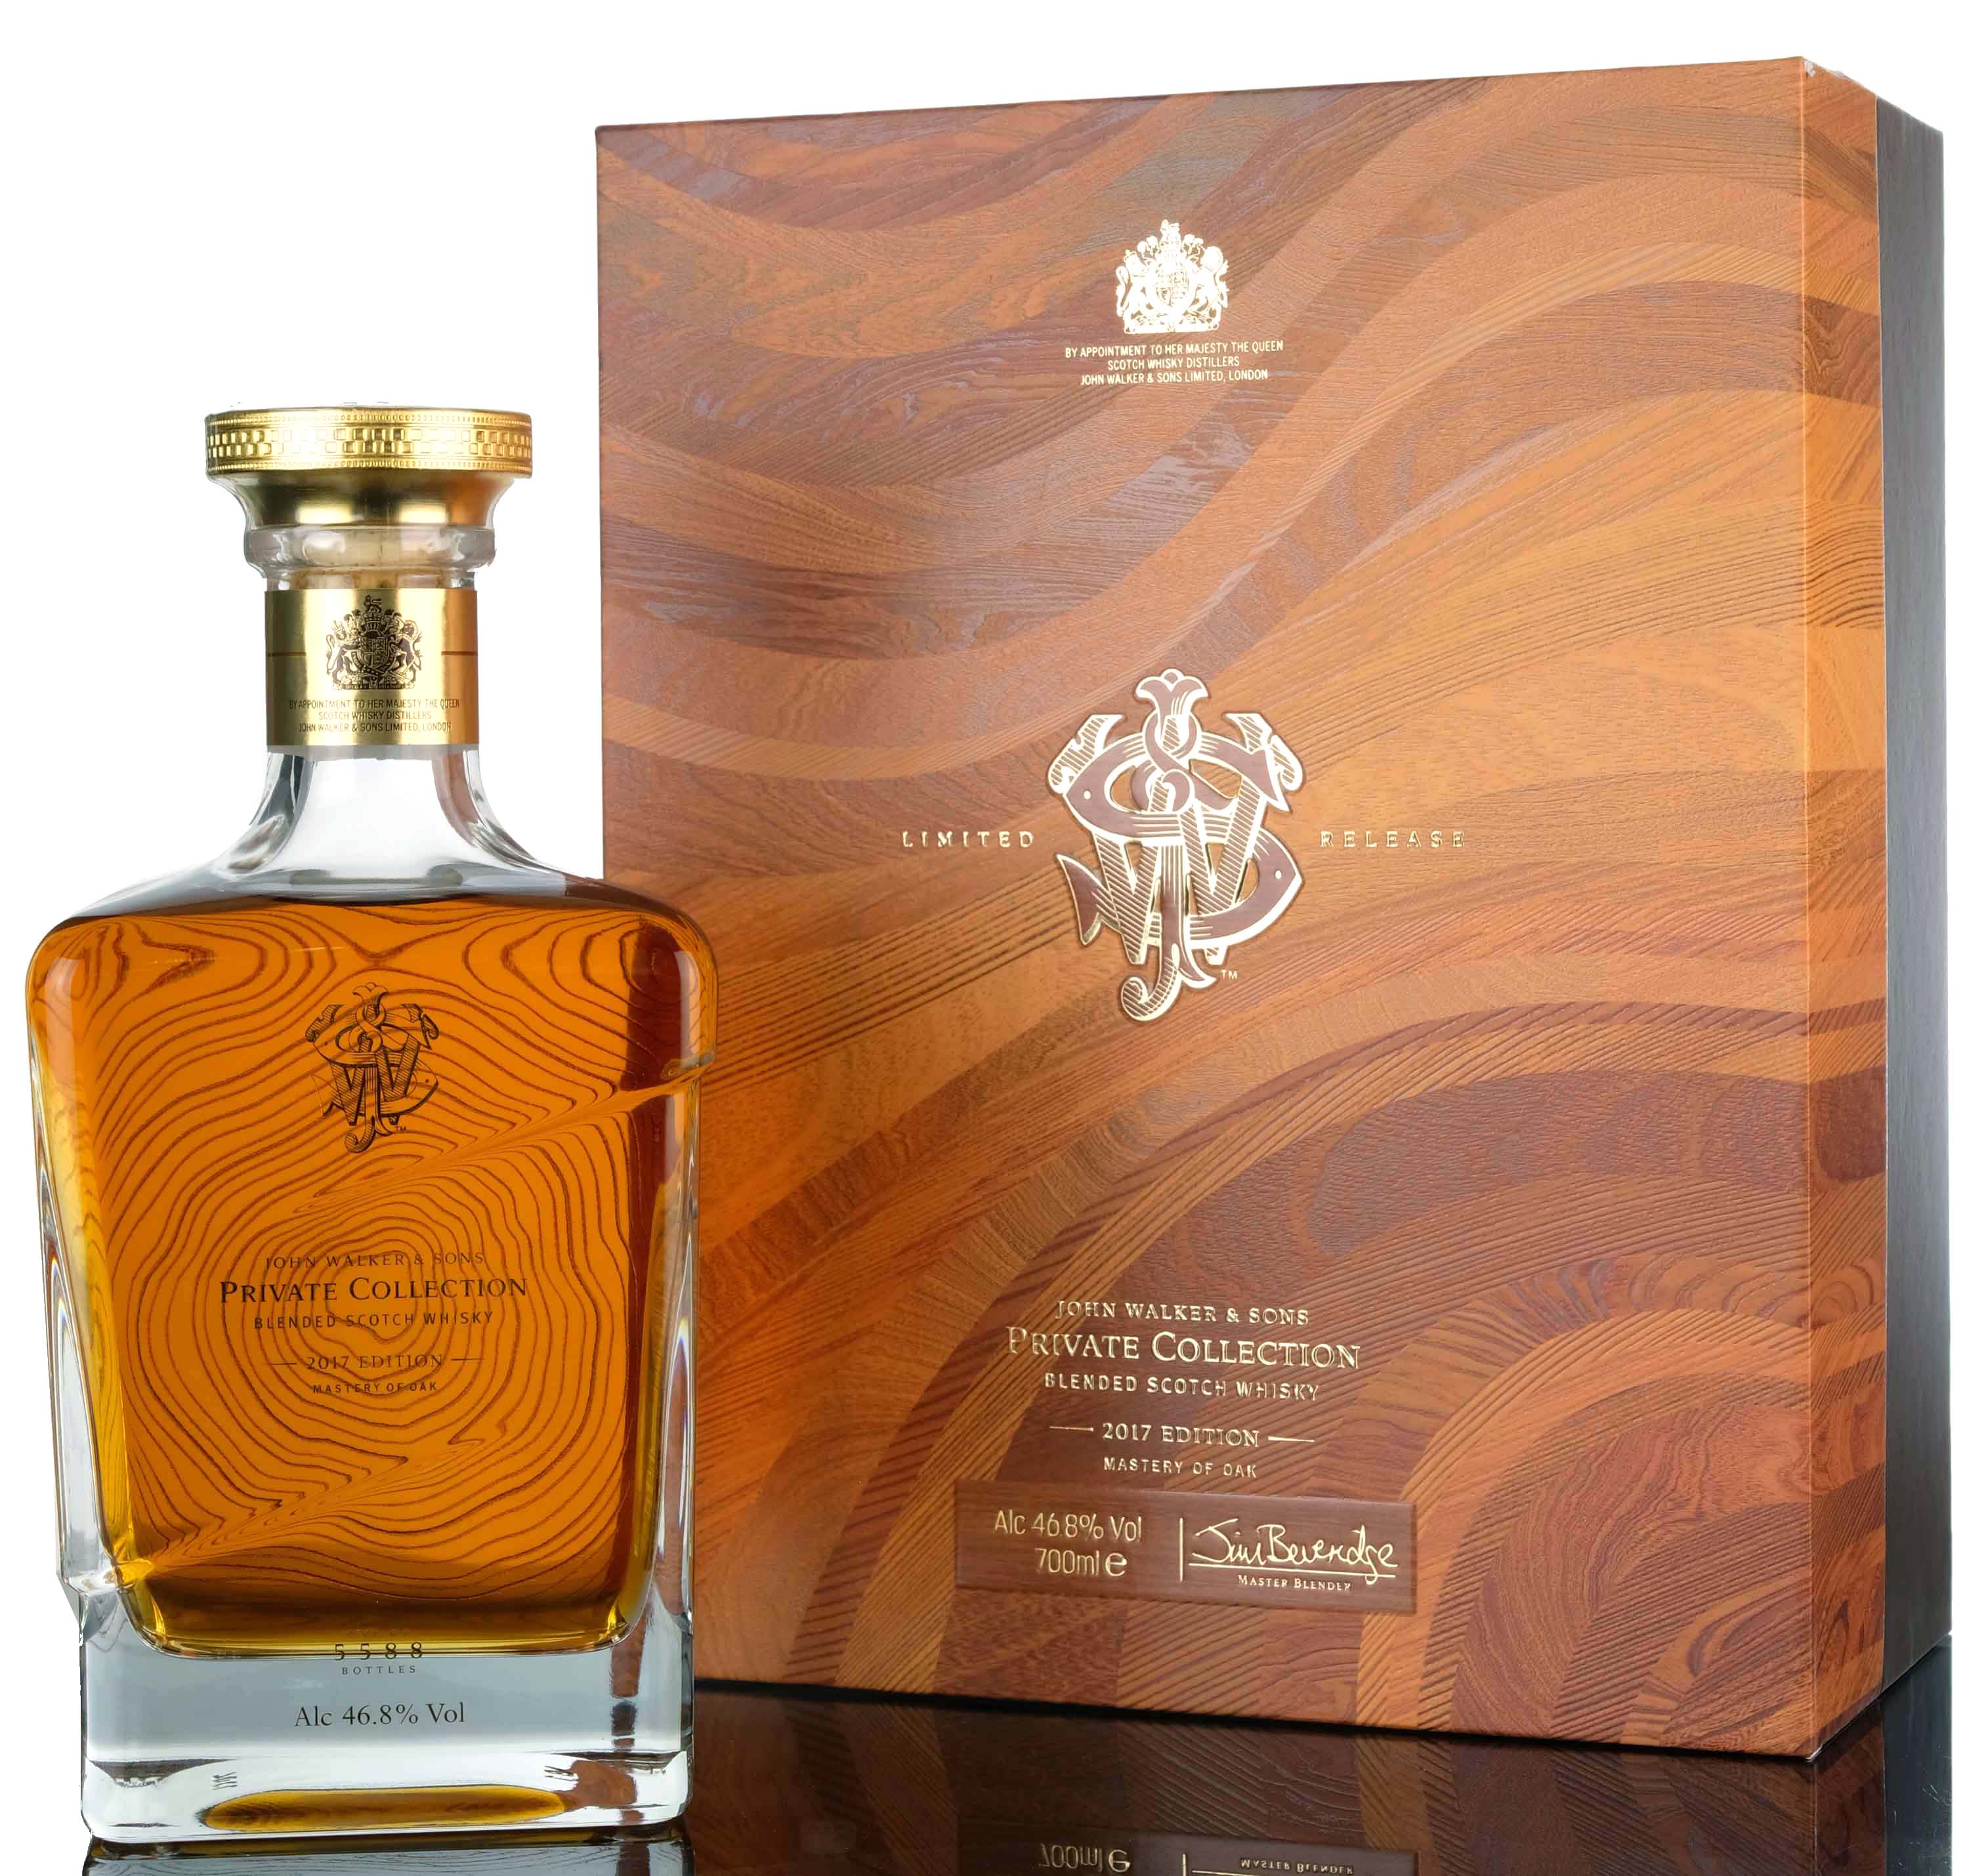 Johnnie Walker Private Collection 2017 Edition